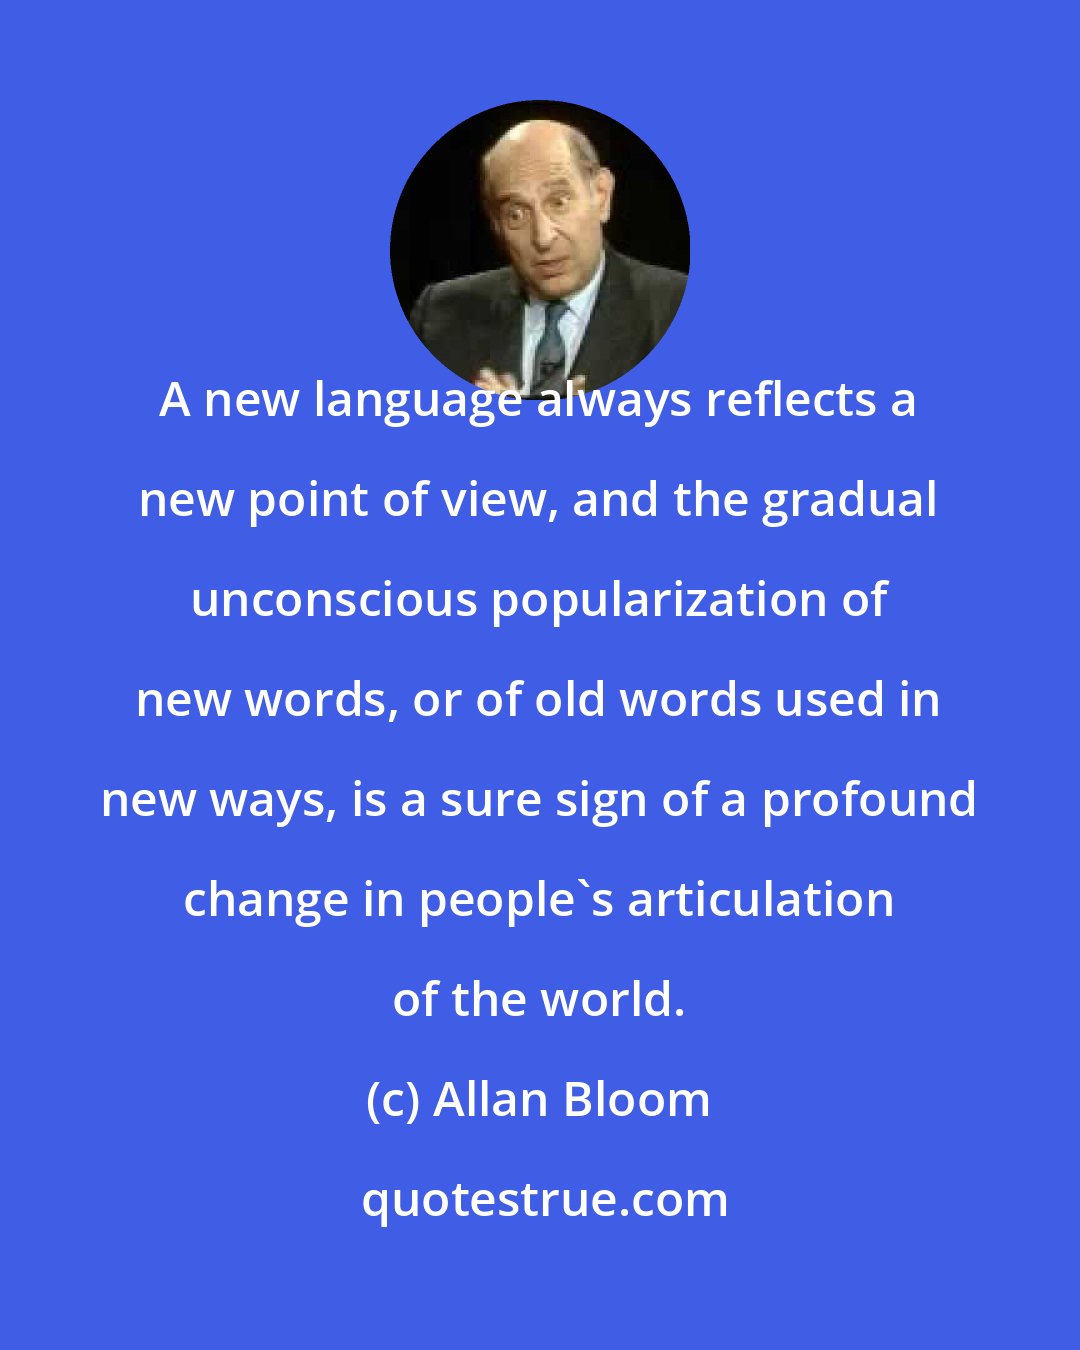 Allan Bloom: A new language always reflects a new point of view, and the gradual unconscious popularization of new words, or of old words used in new ways, is a sure sign of a profound change in people's articulation of the world.